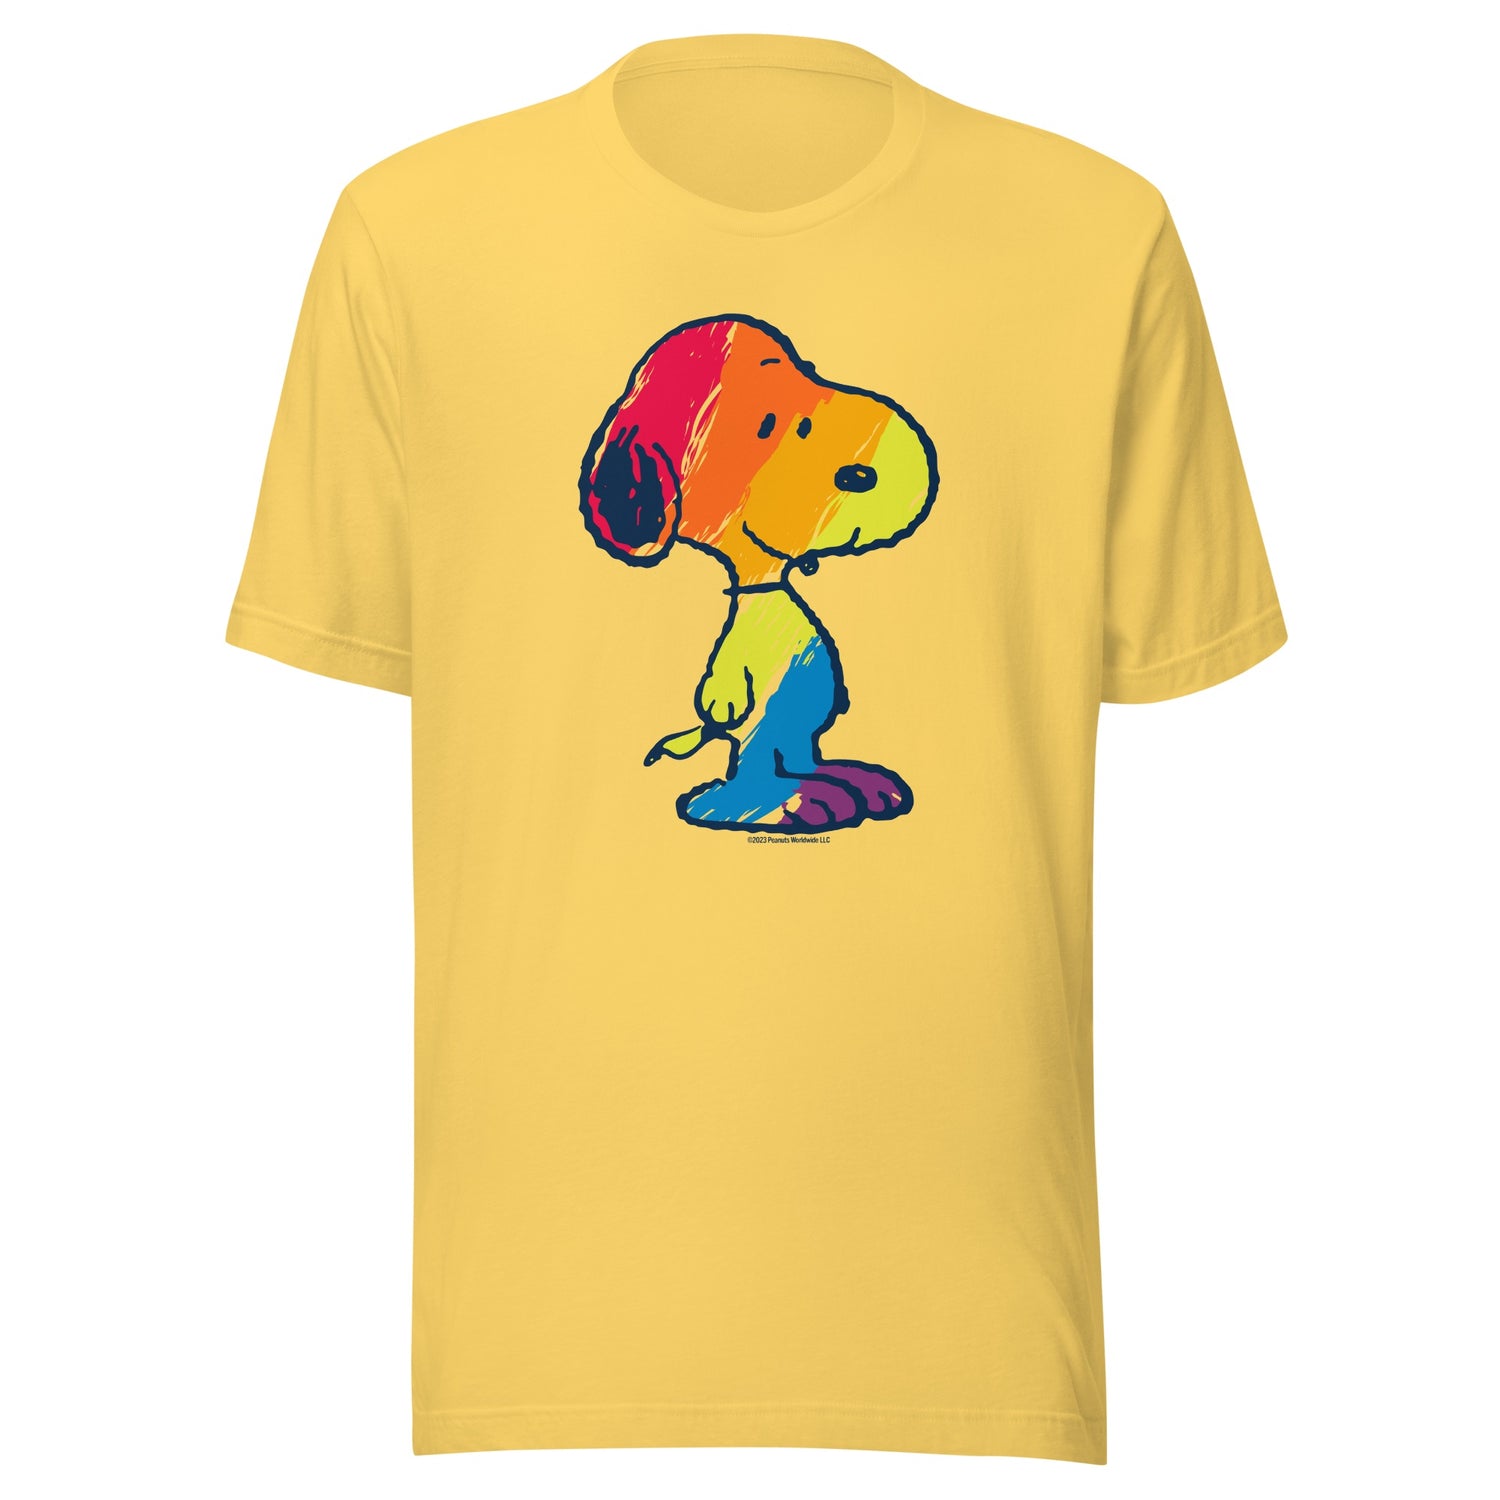 Snoopy Rainbow Colored Adult T-Shirt – The Peanuts Store